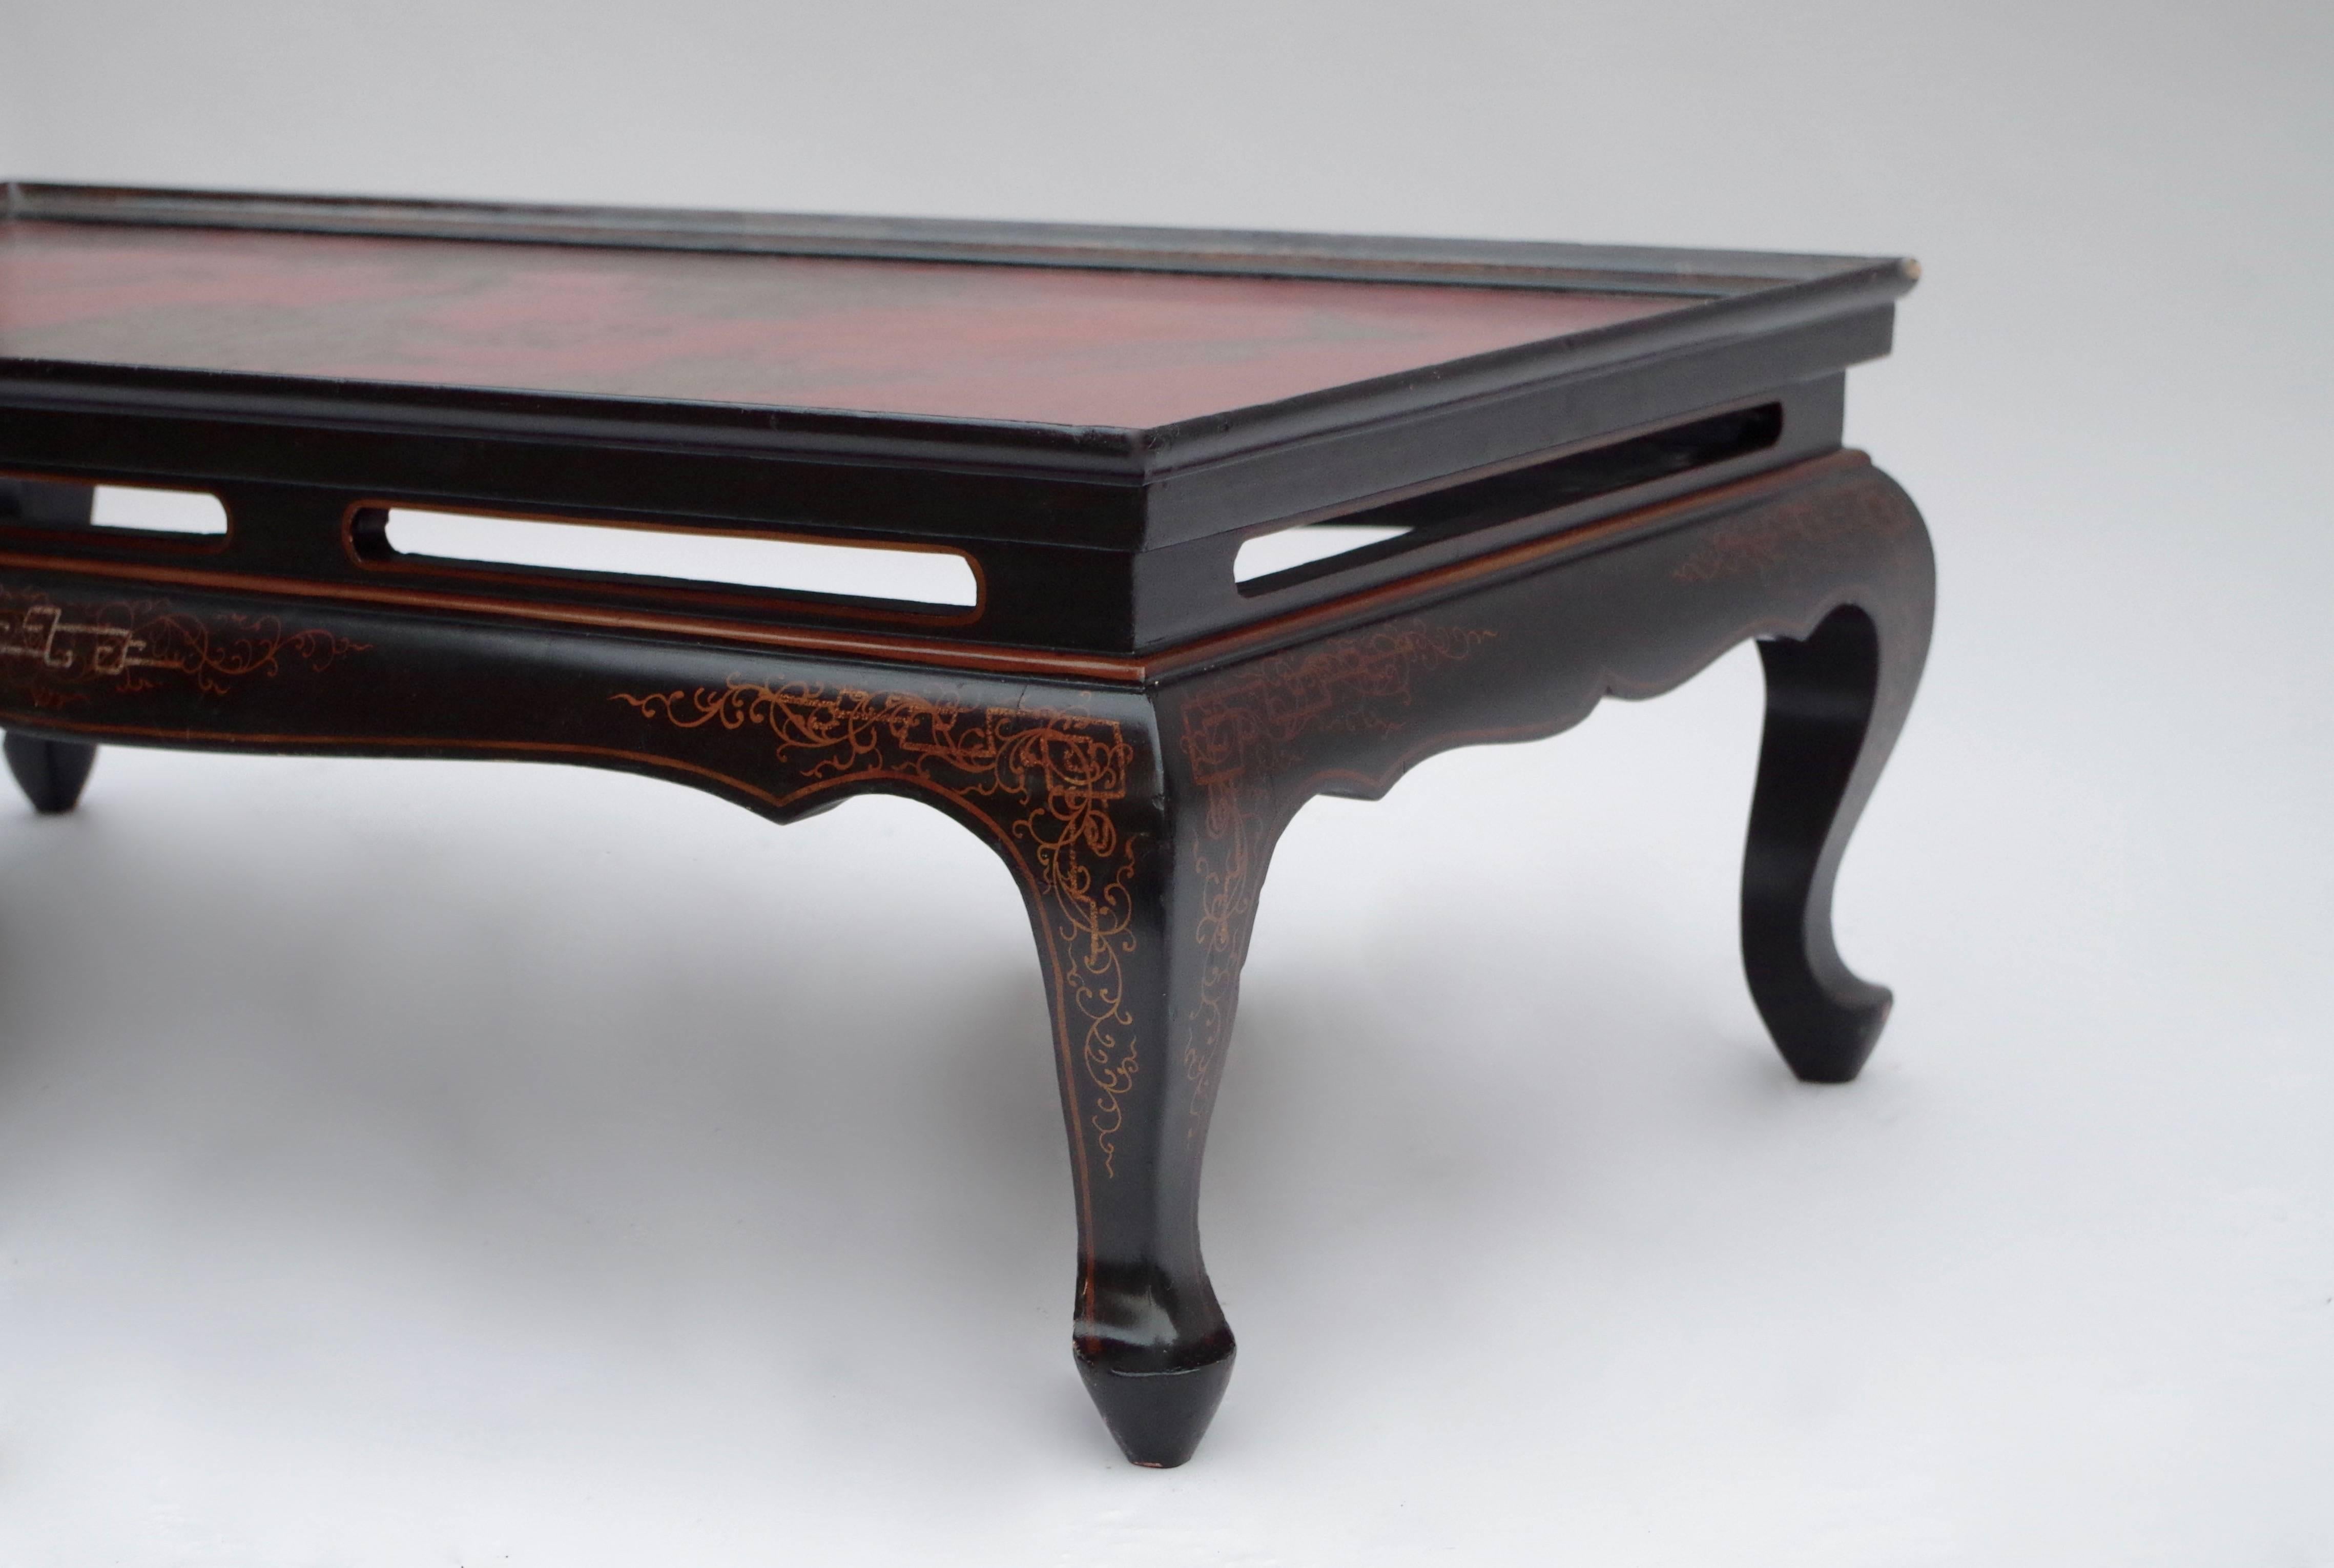 Coffee table made with a top in Japanese Lacquer from 1900-1920 and mounted circa 1950 on a black lacquered and golden varnish Louis XV style base, standing on four curved legs. Landscape decoration on the tray.